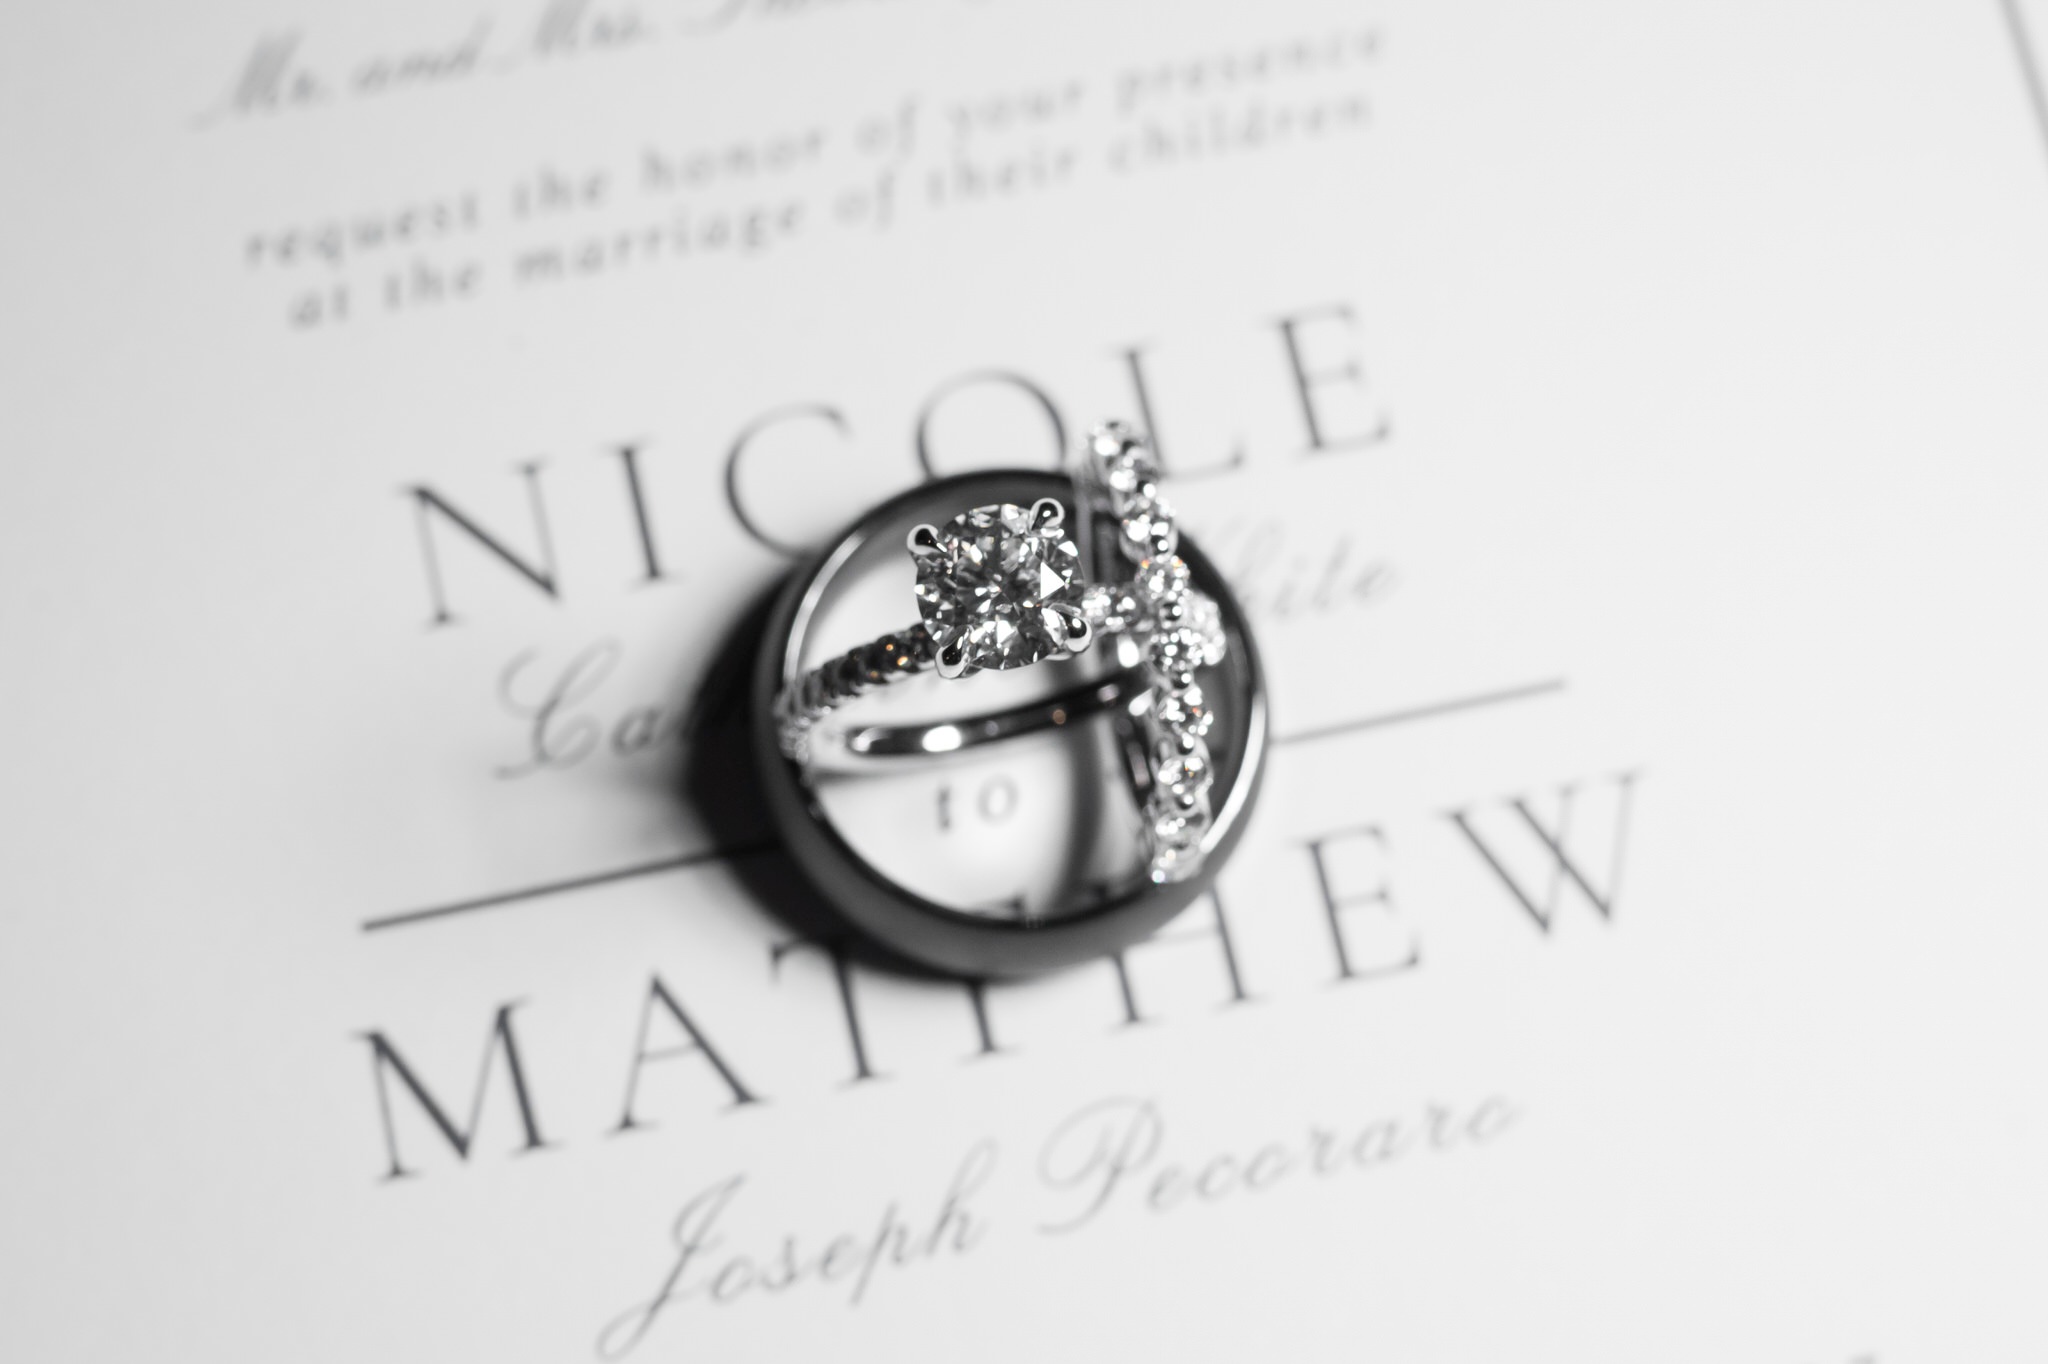 Wedding rings sit on top of an invite.